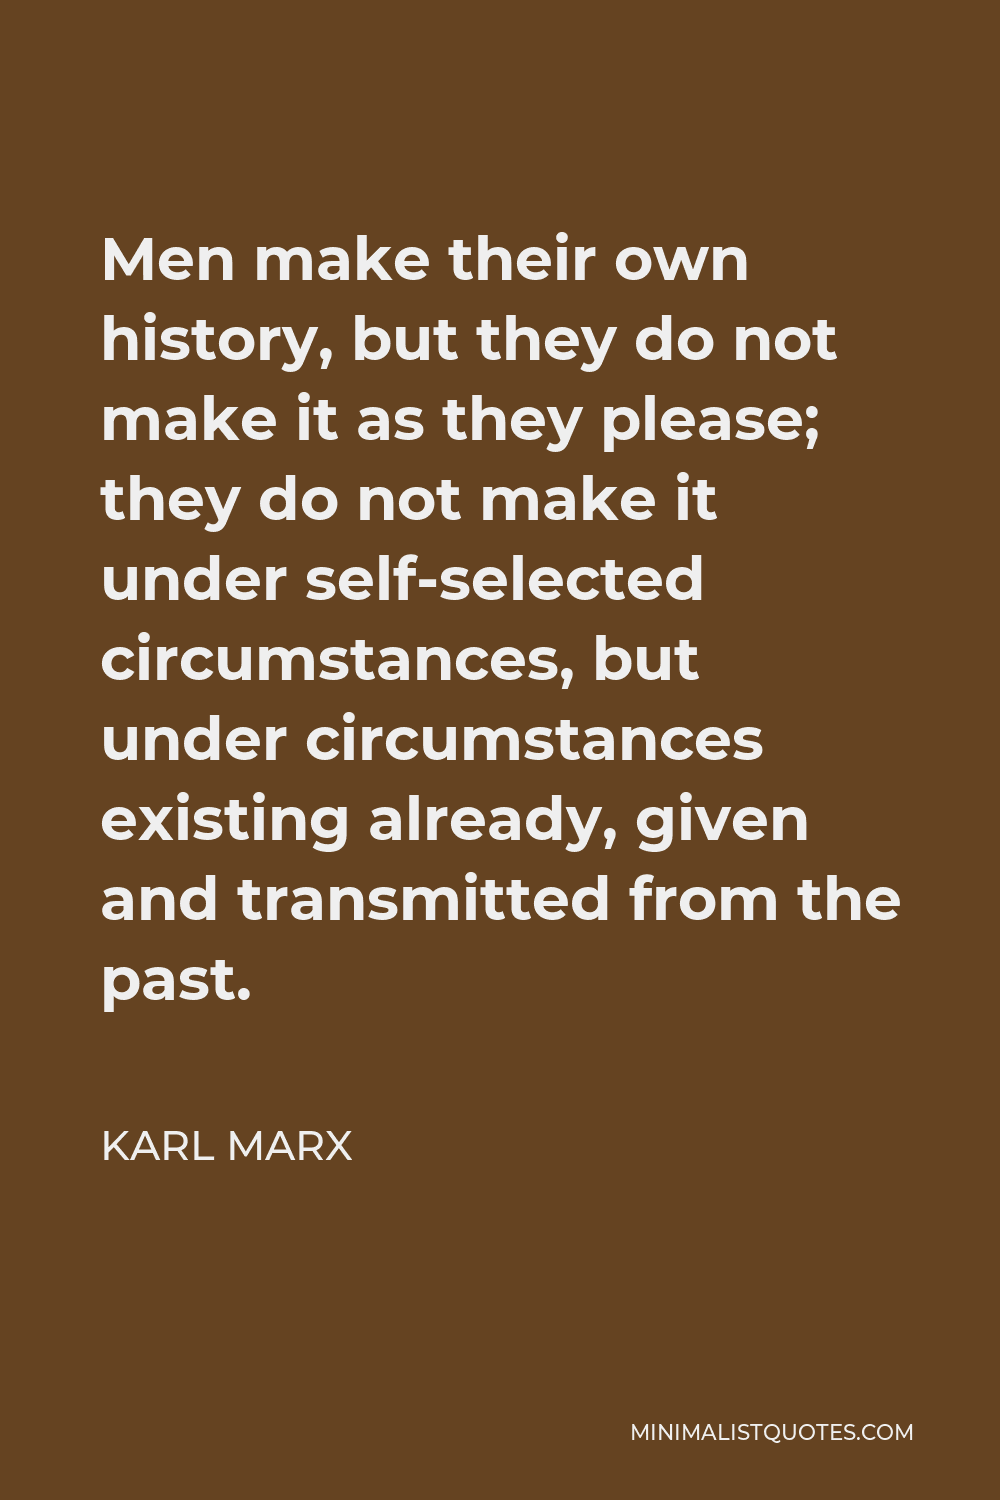 Karl Marx Quote - Men make their own history, but they do not make it as they please; they do not make it under self-selected circumstances, but under circumstances existing already, given and transmitted from the past.